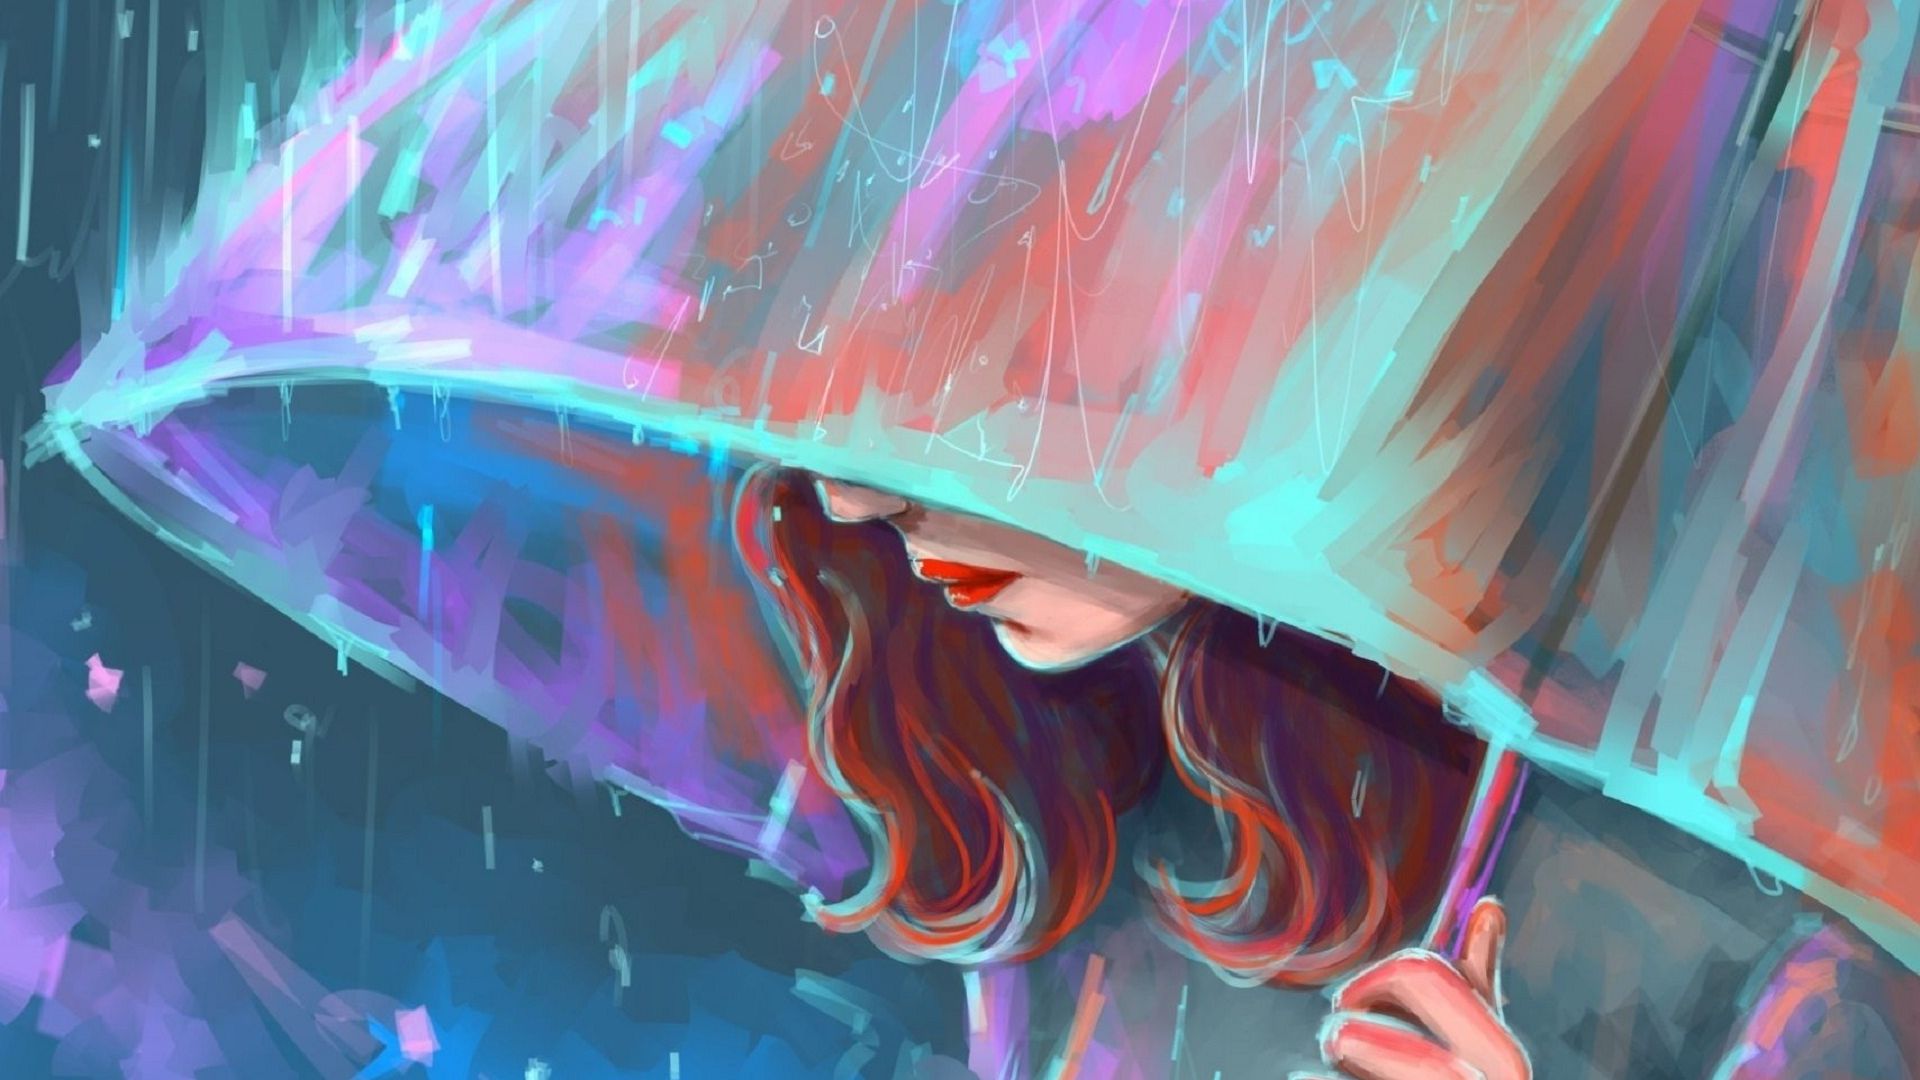 Desktop Wallpaper I Miss You Sad Girl In Rain With Umbrella Painting Artwork, HD Image, Picture, Background, F4qwf